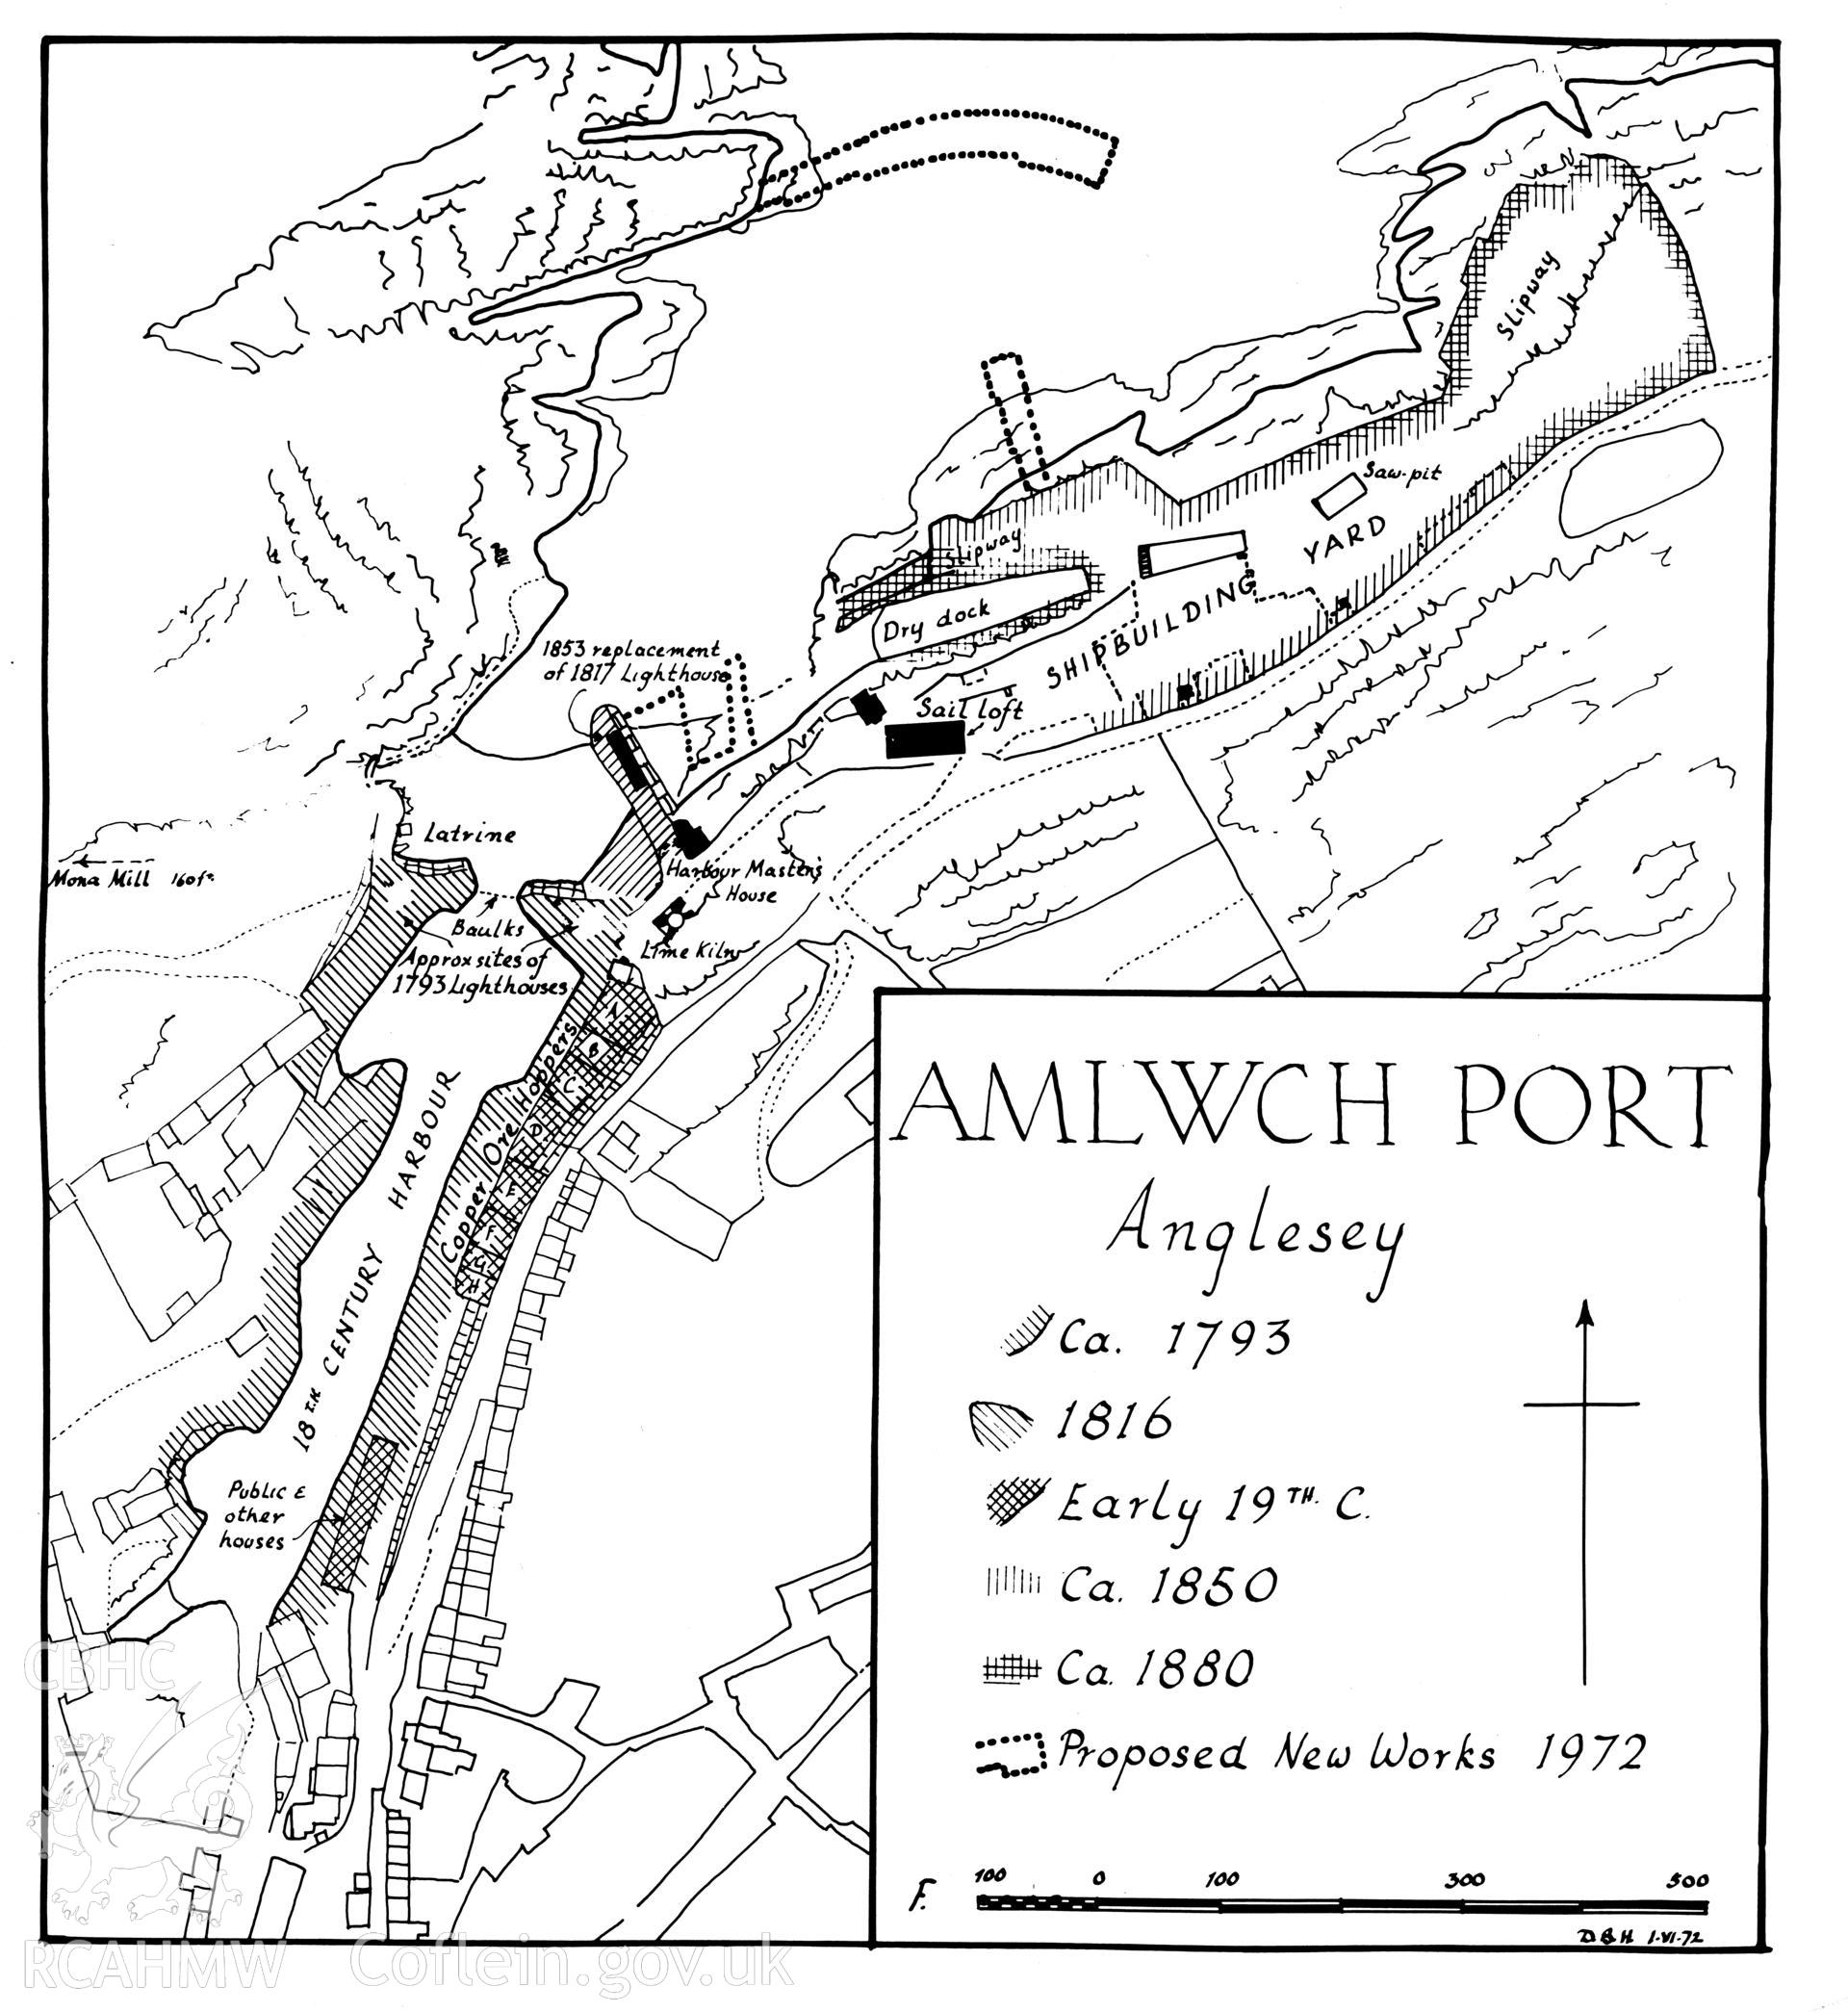 Map showing the development of Amlwch Harbour from 1793, including the proposed works of 1972, produced by Douglas Hague 1972.